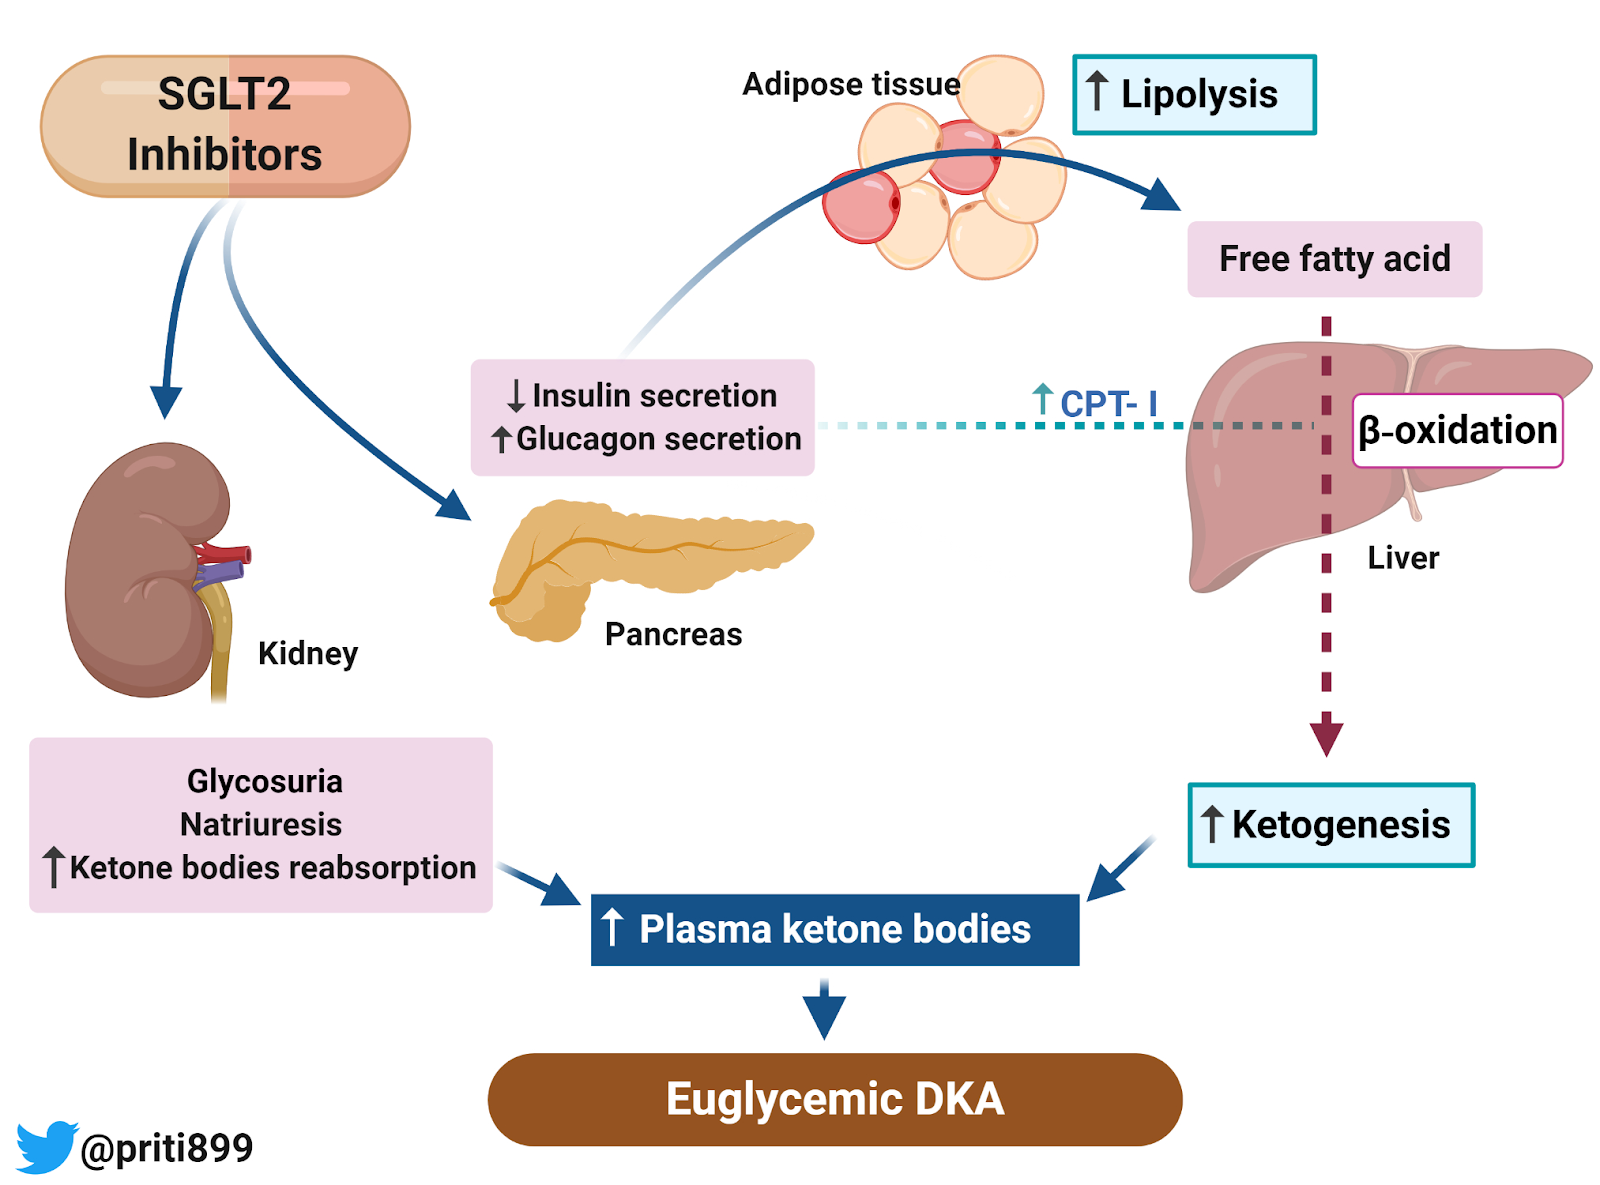 sglt2-inhibitor-induced-euglycemic-diabetic-ketoacidosis-renal-fellow